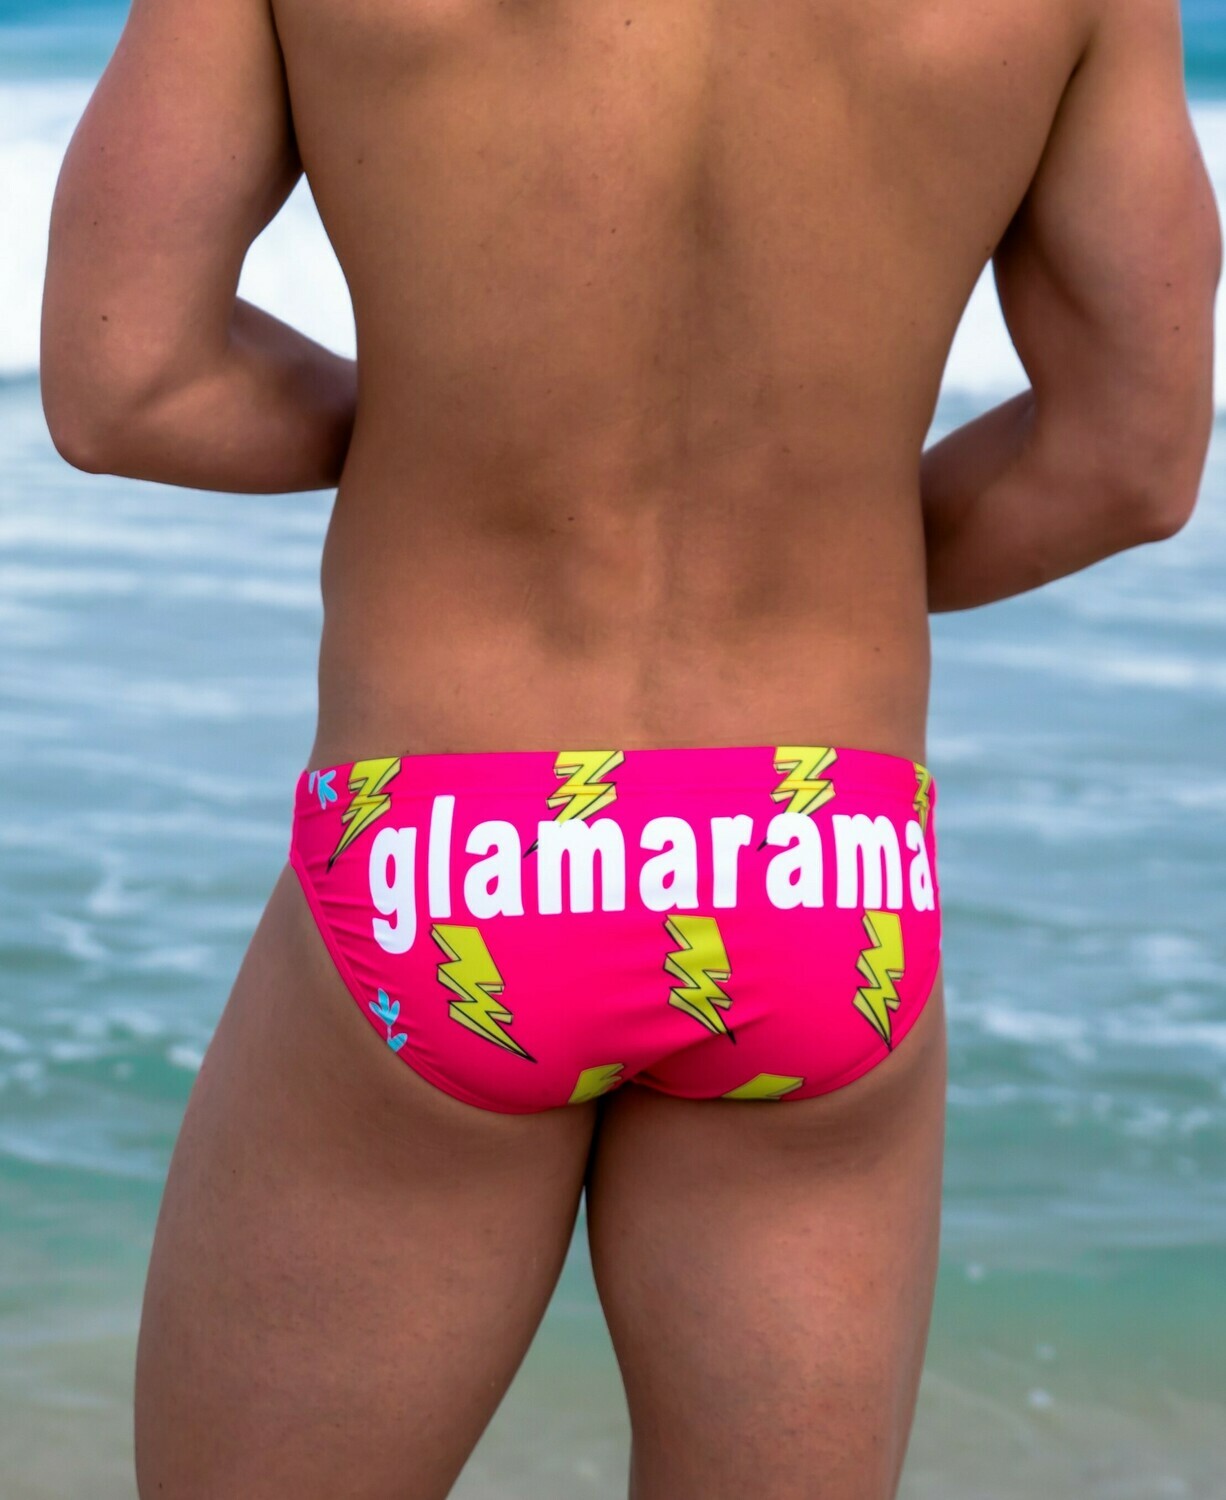 XL size only - Glamarama Lightening Bolt Mens Swimmers by Resqme